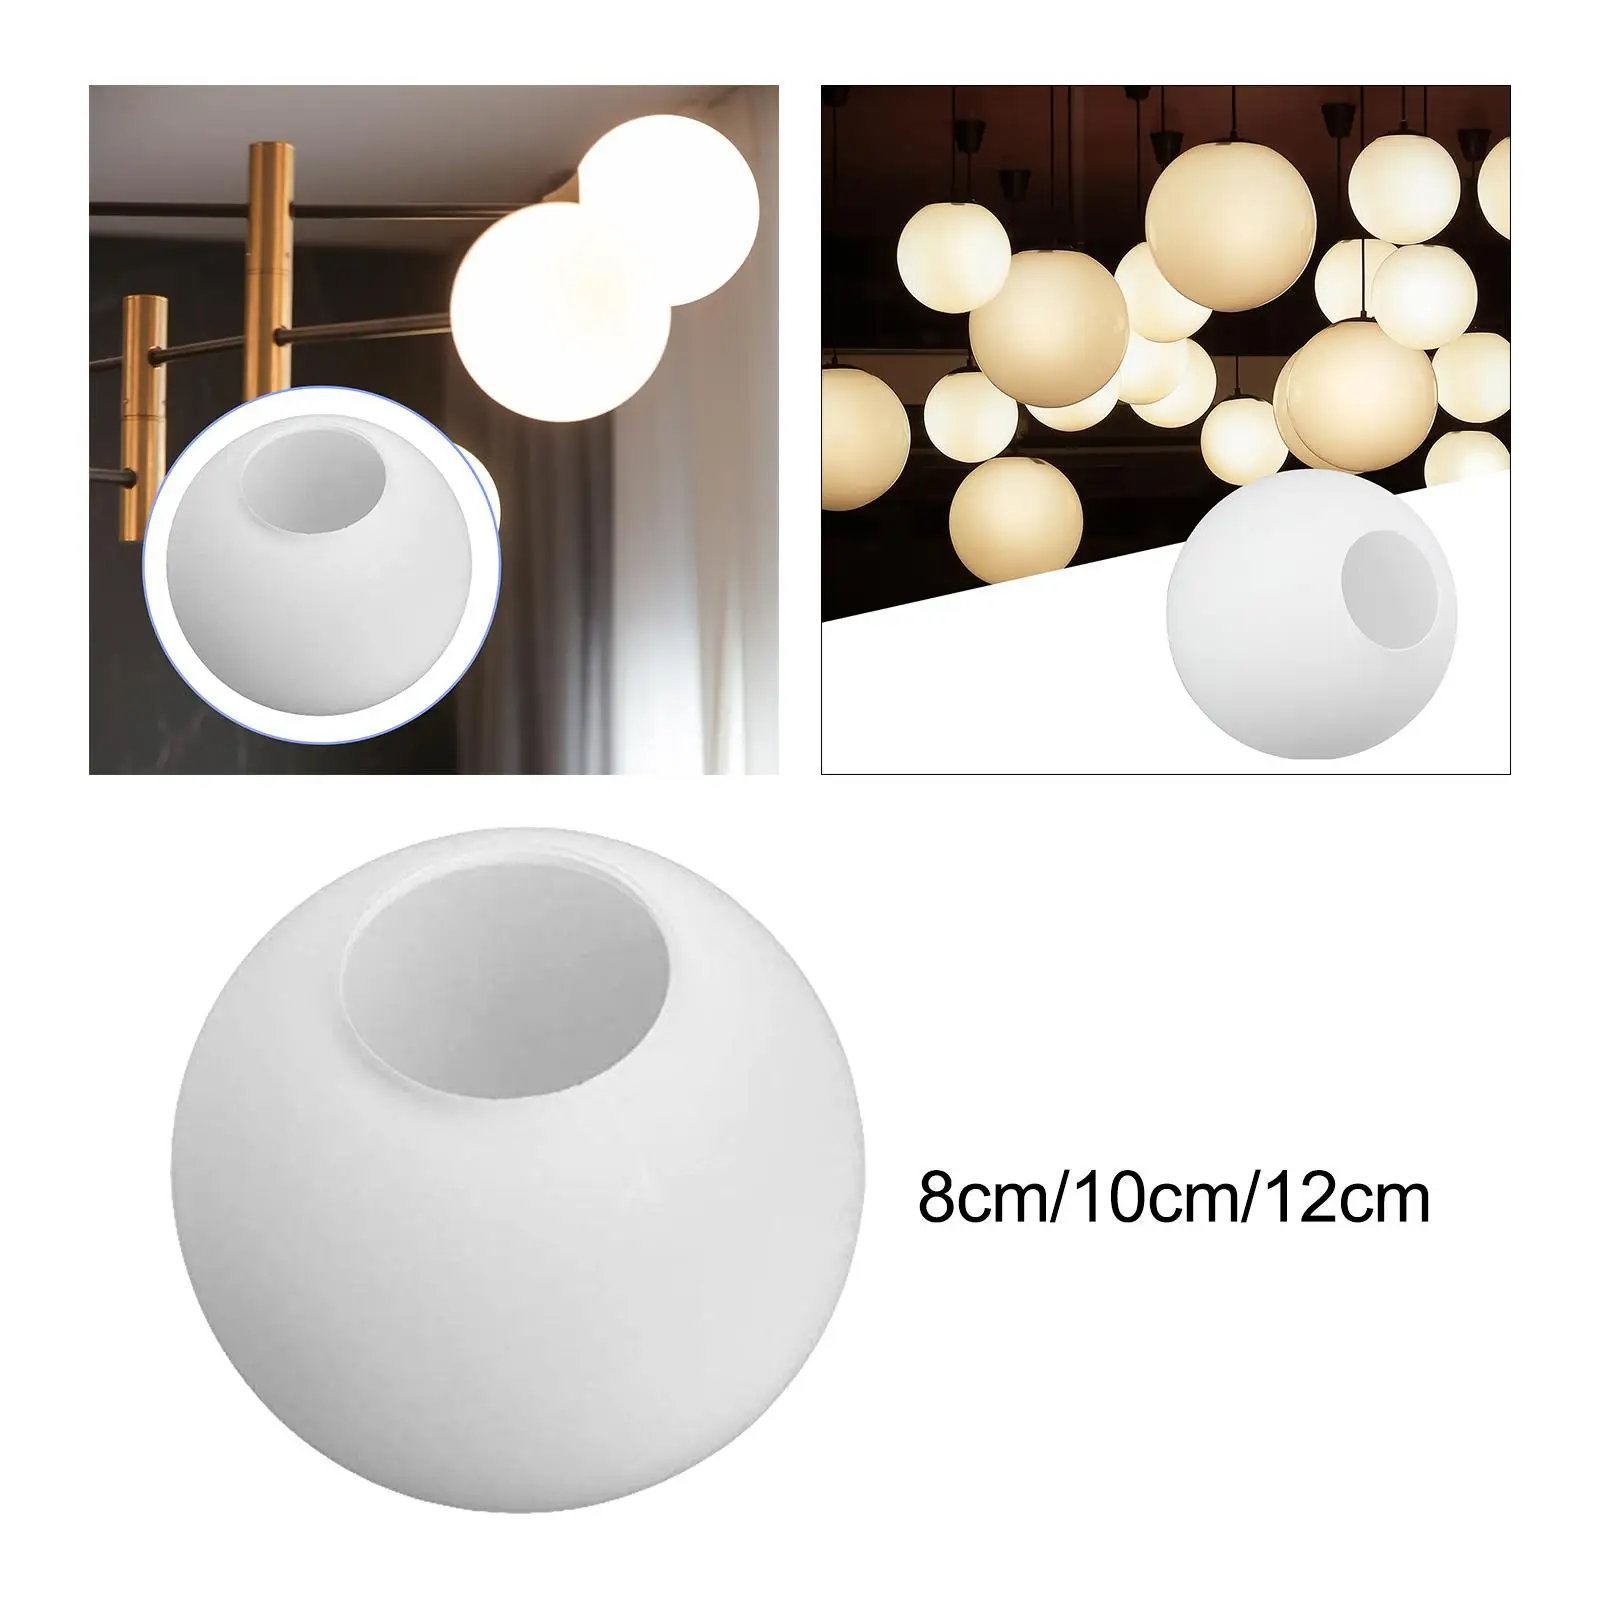 Modern Glass Ball Lamp Shade Chandelier Shade Fixture Cover Round Lampshade for Decor Bedroom Hotel Teahouse Library